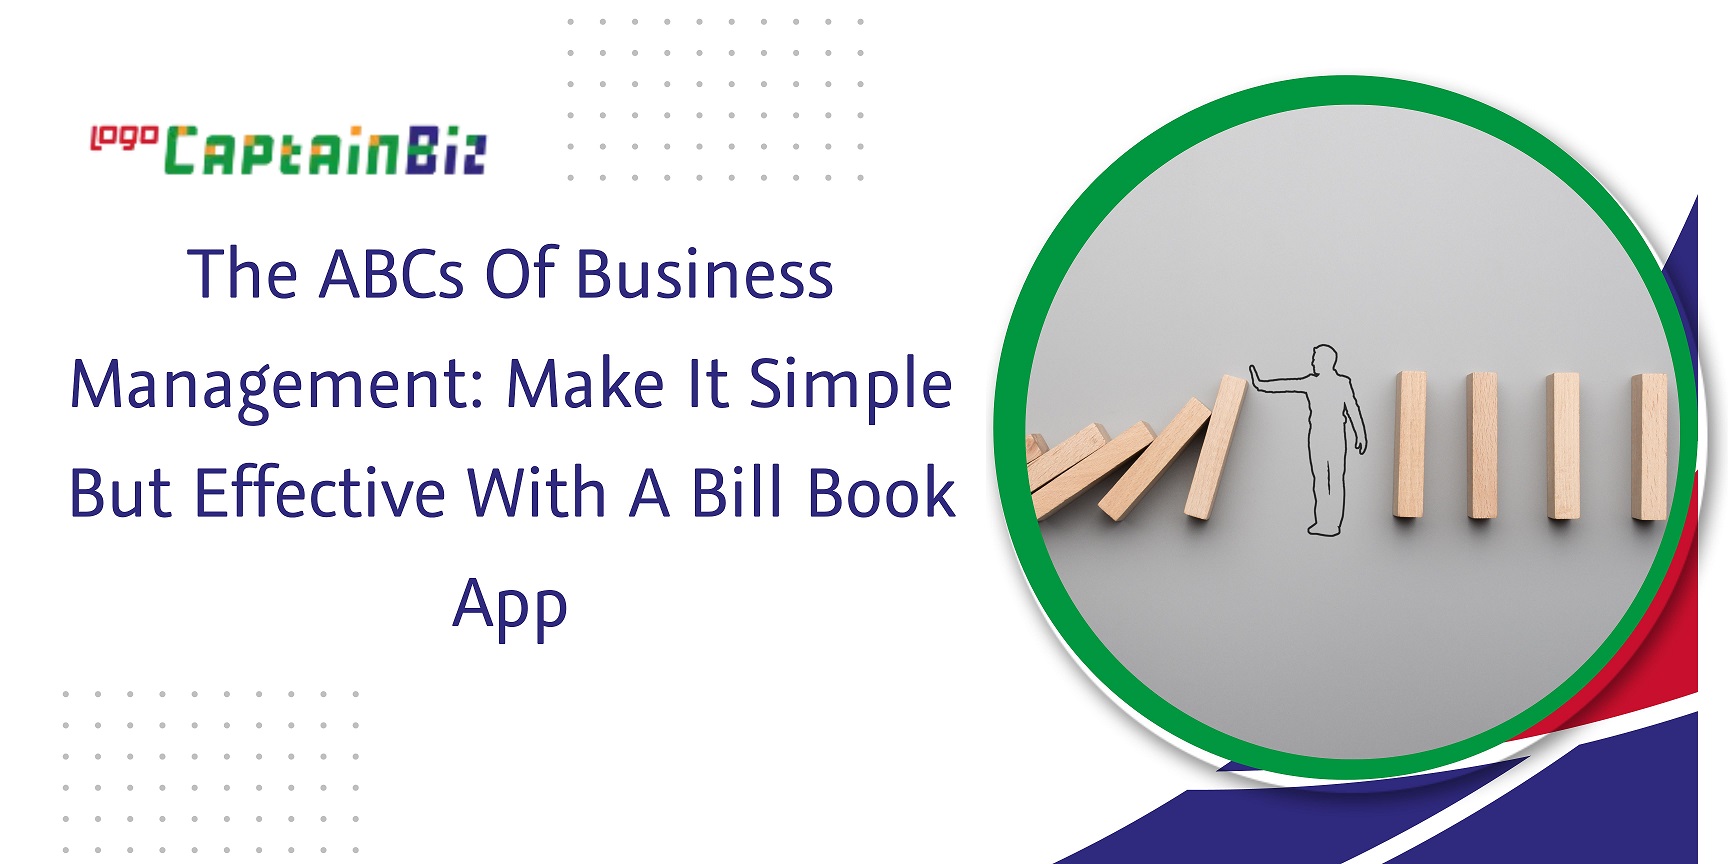 CaptainBiz: the abcs of business management make it simple but effective with a bill book app